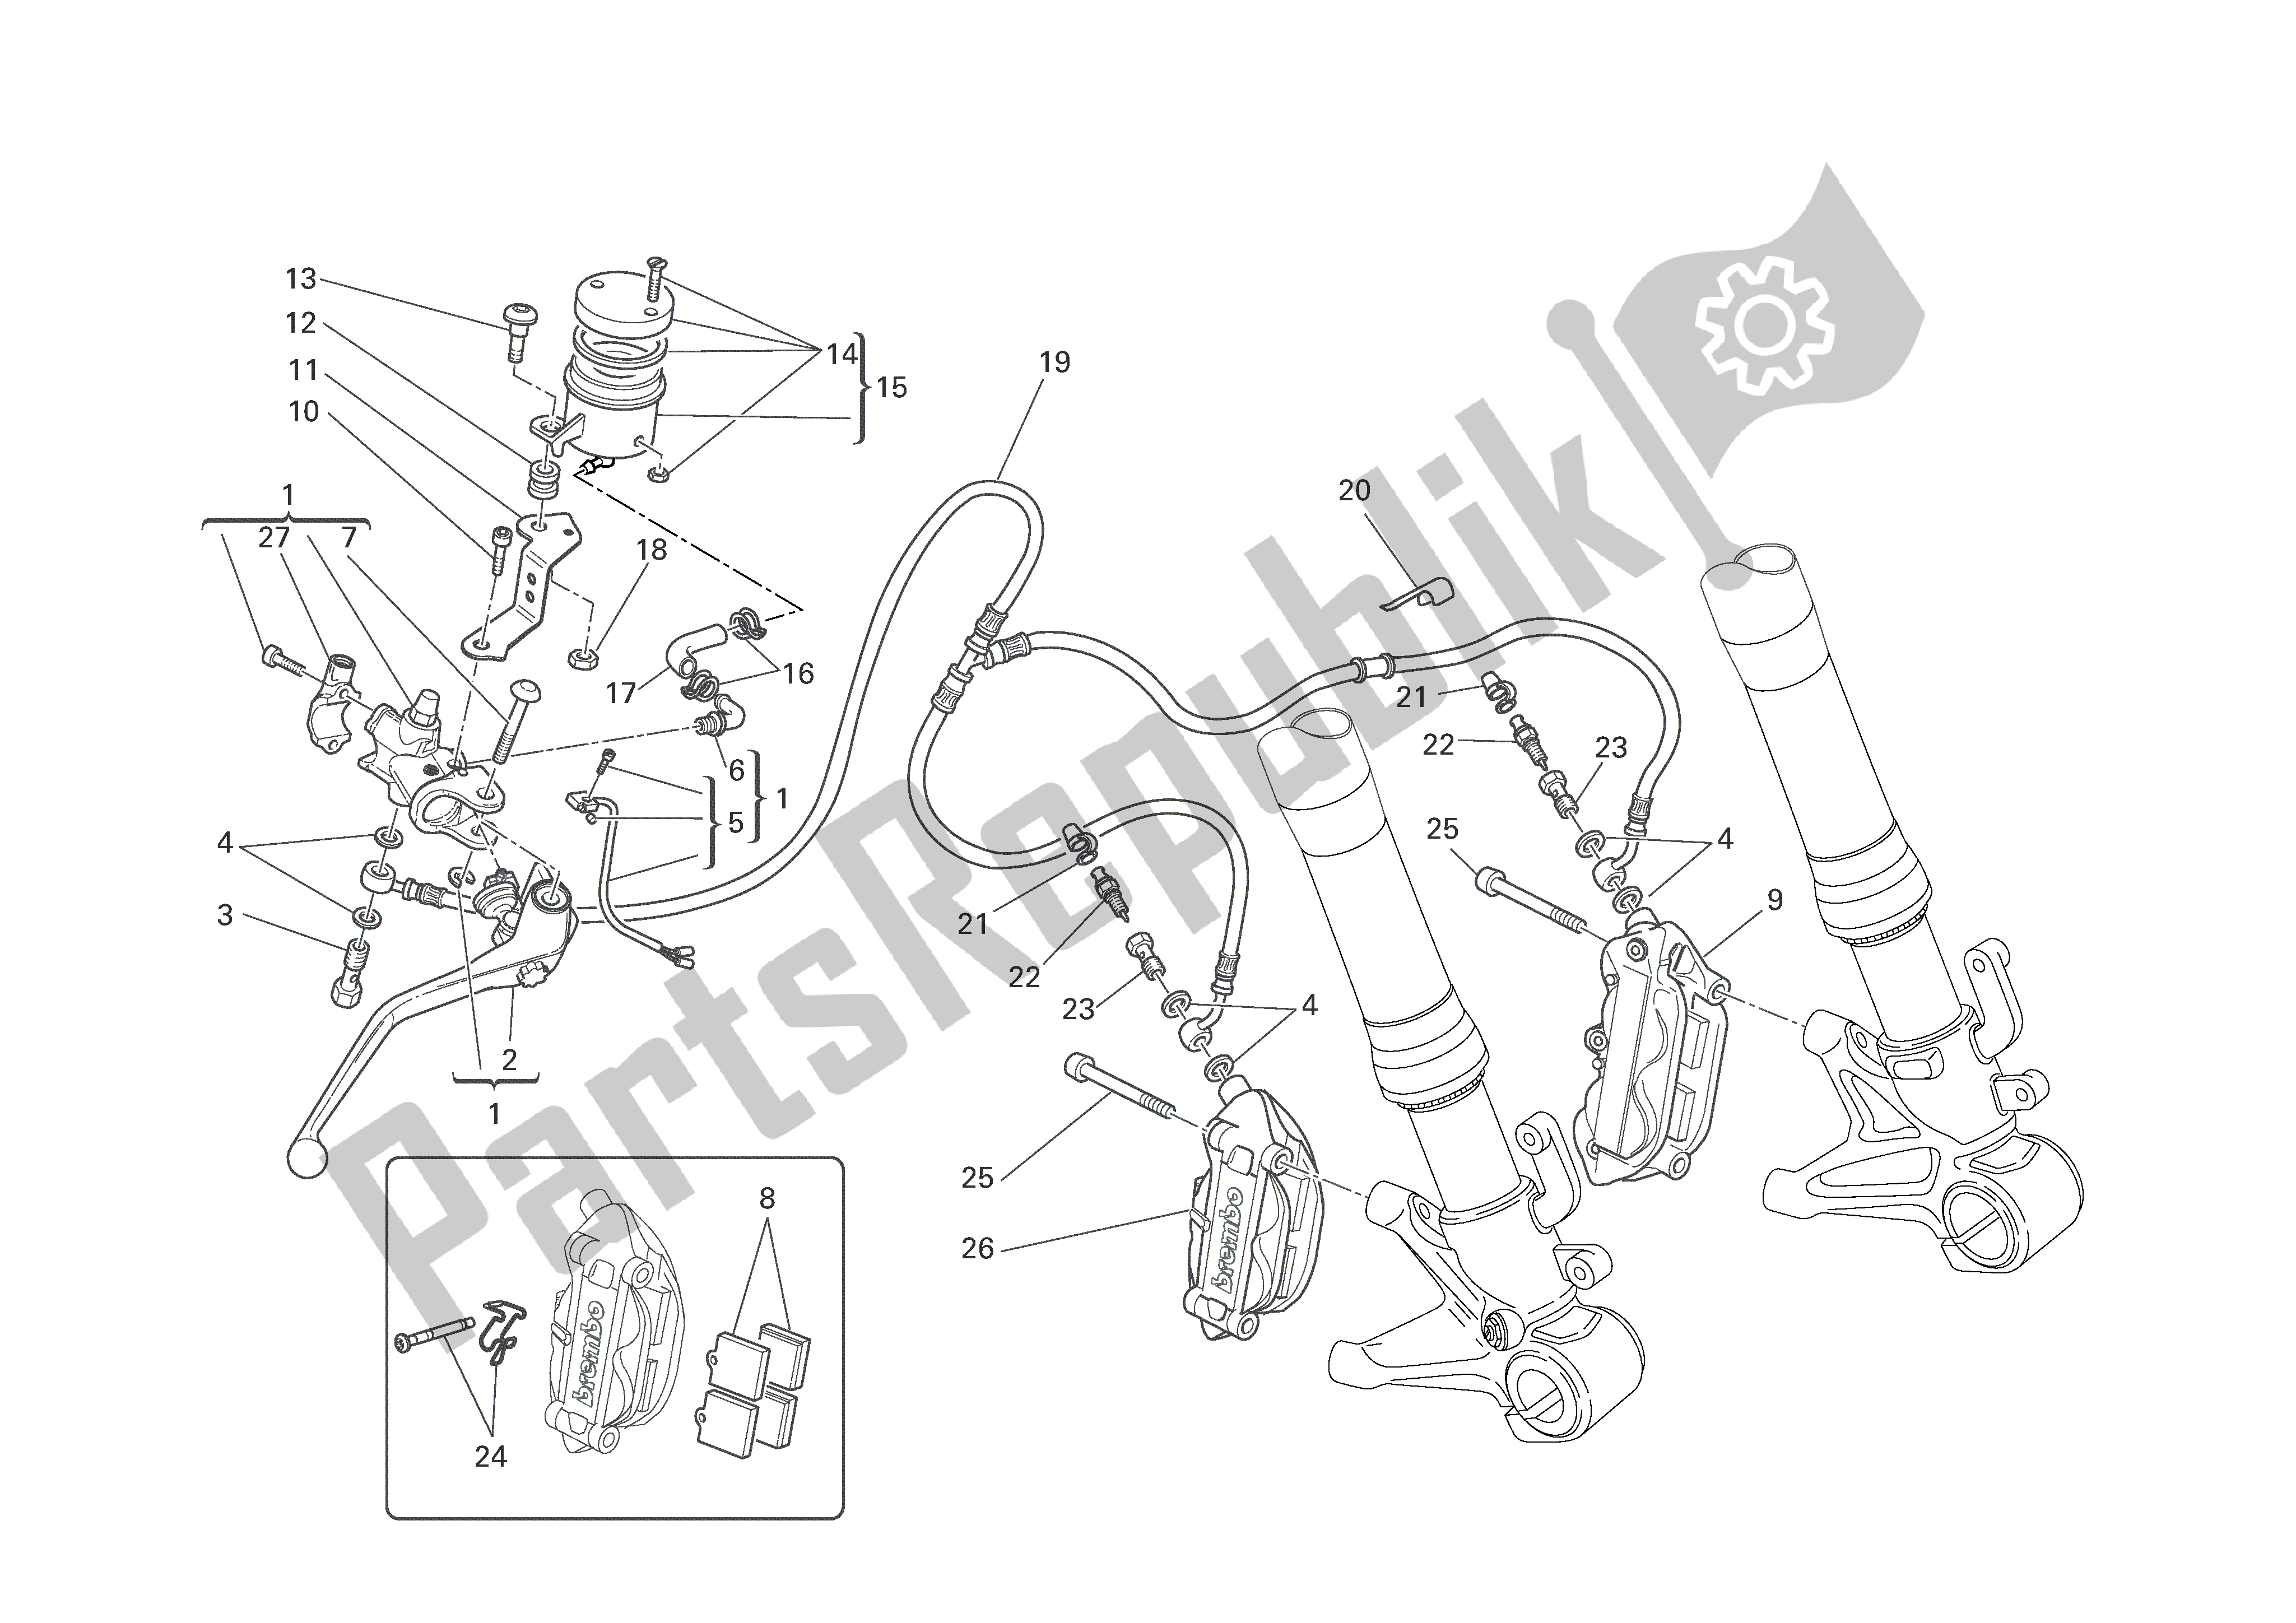 All parts for the Front Brake of the Ducati Monster S4R EU 1000 2008